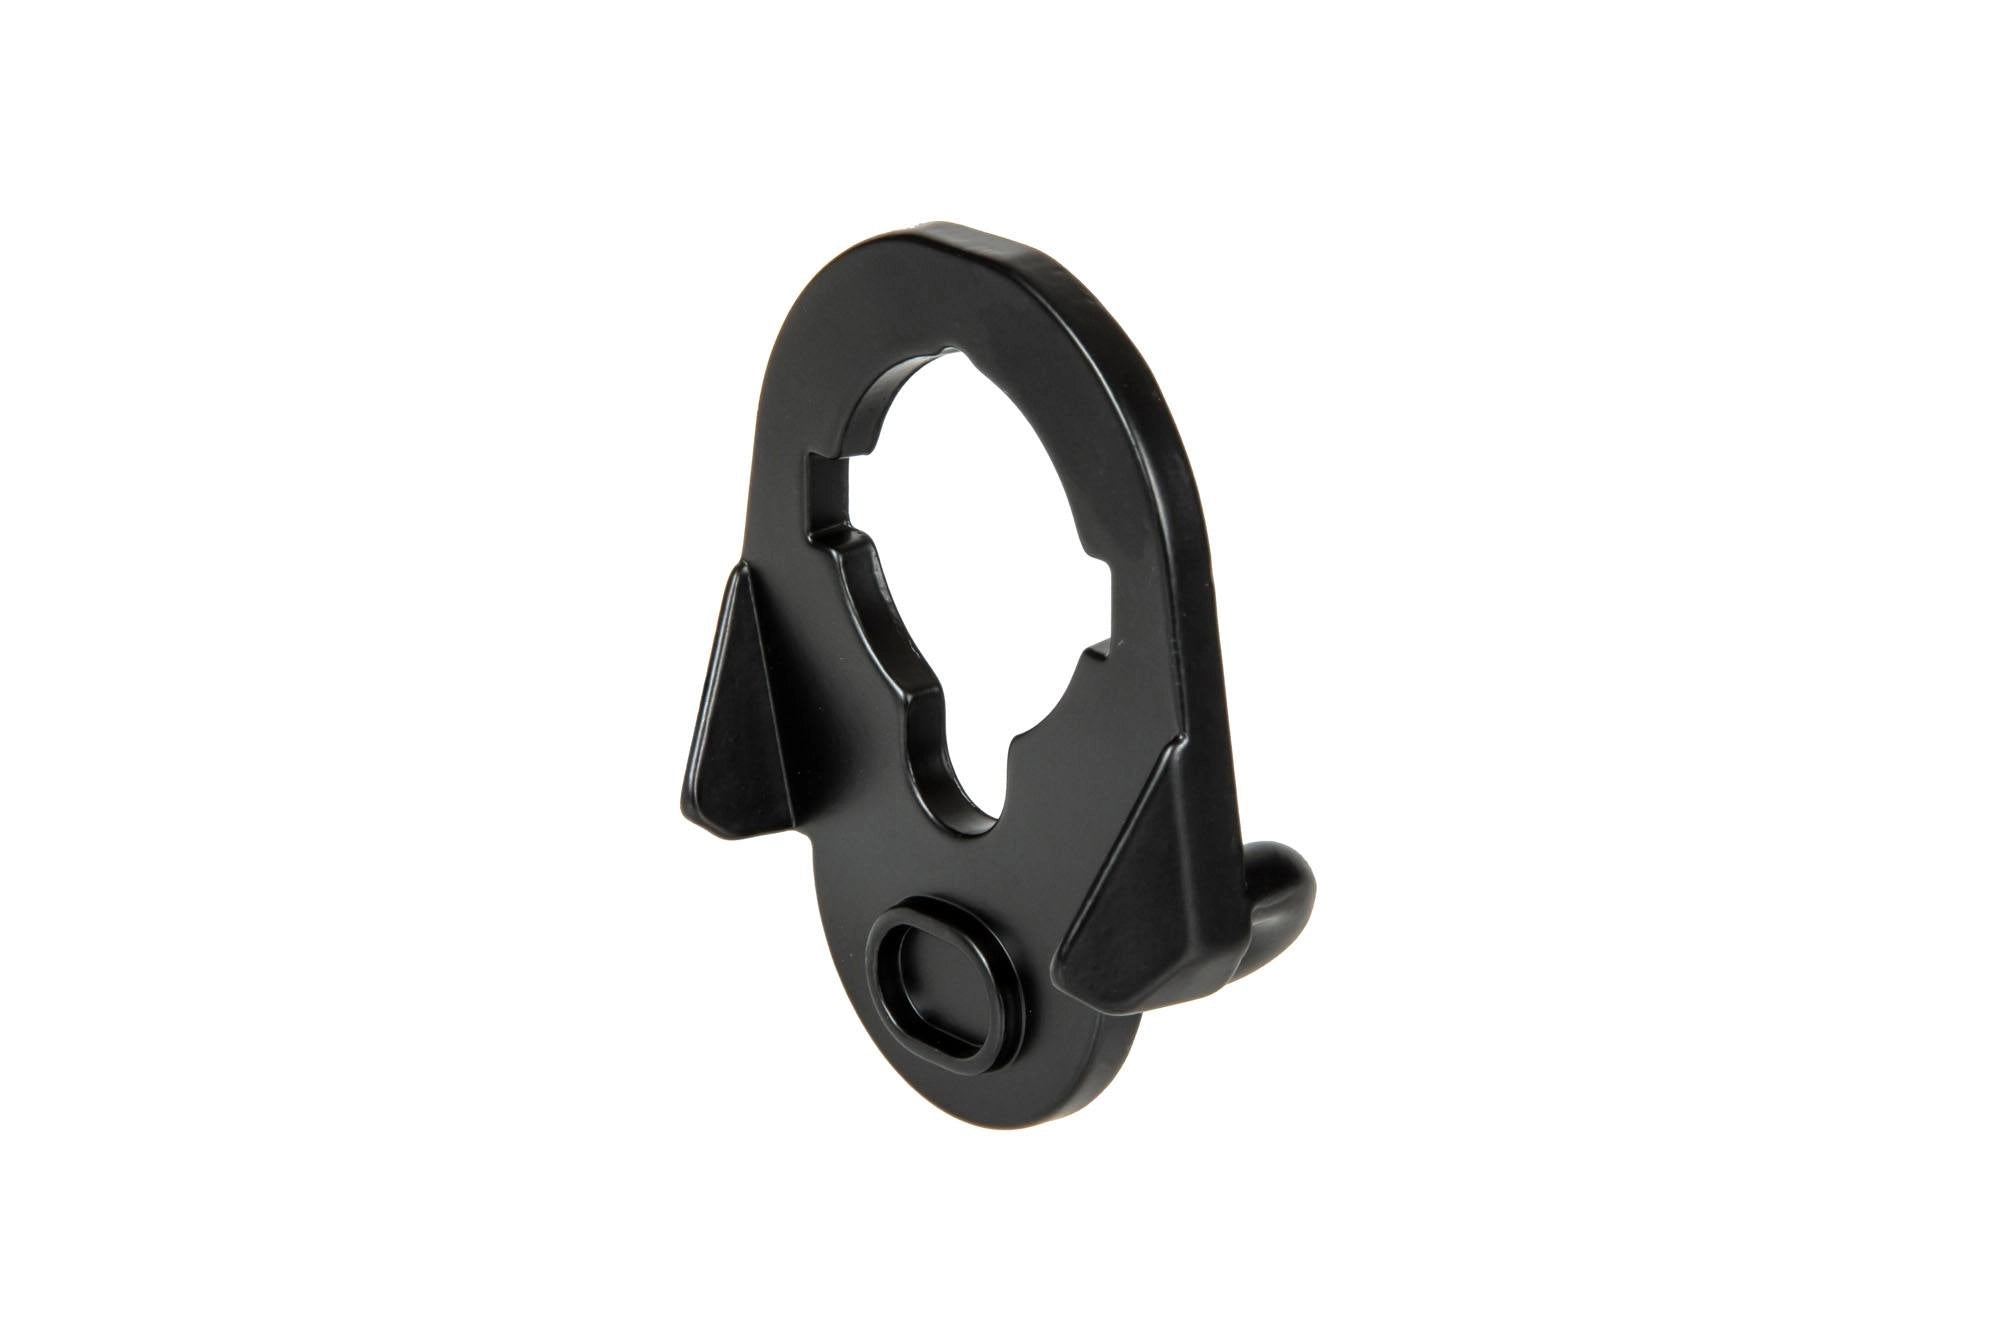 Tactical Sling Swivel for M4/M16 Replicas-1